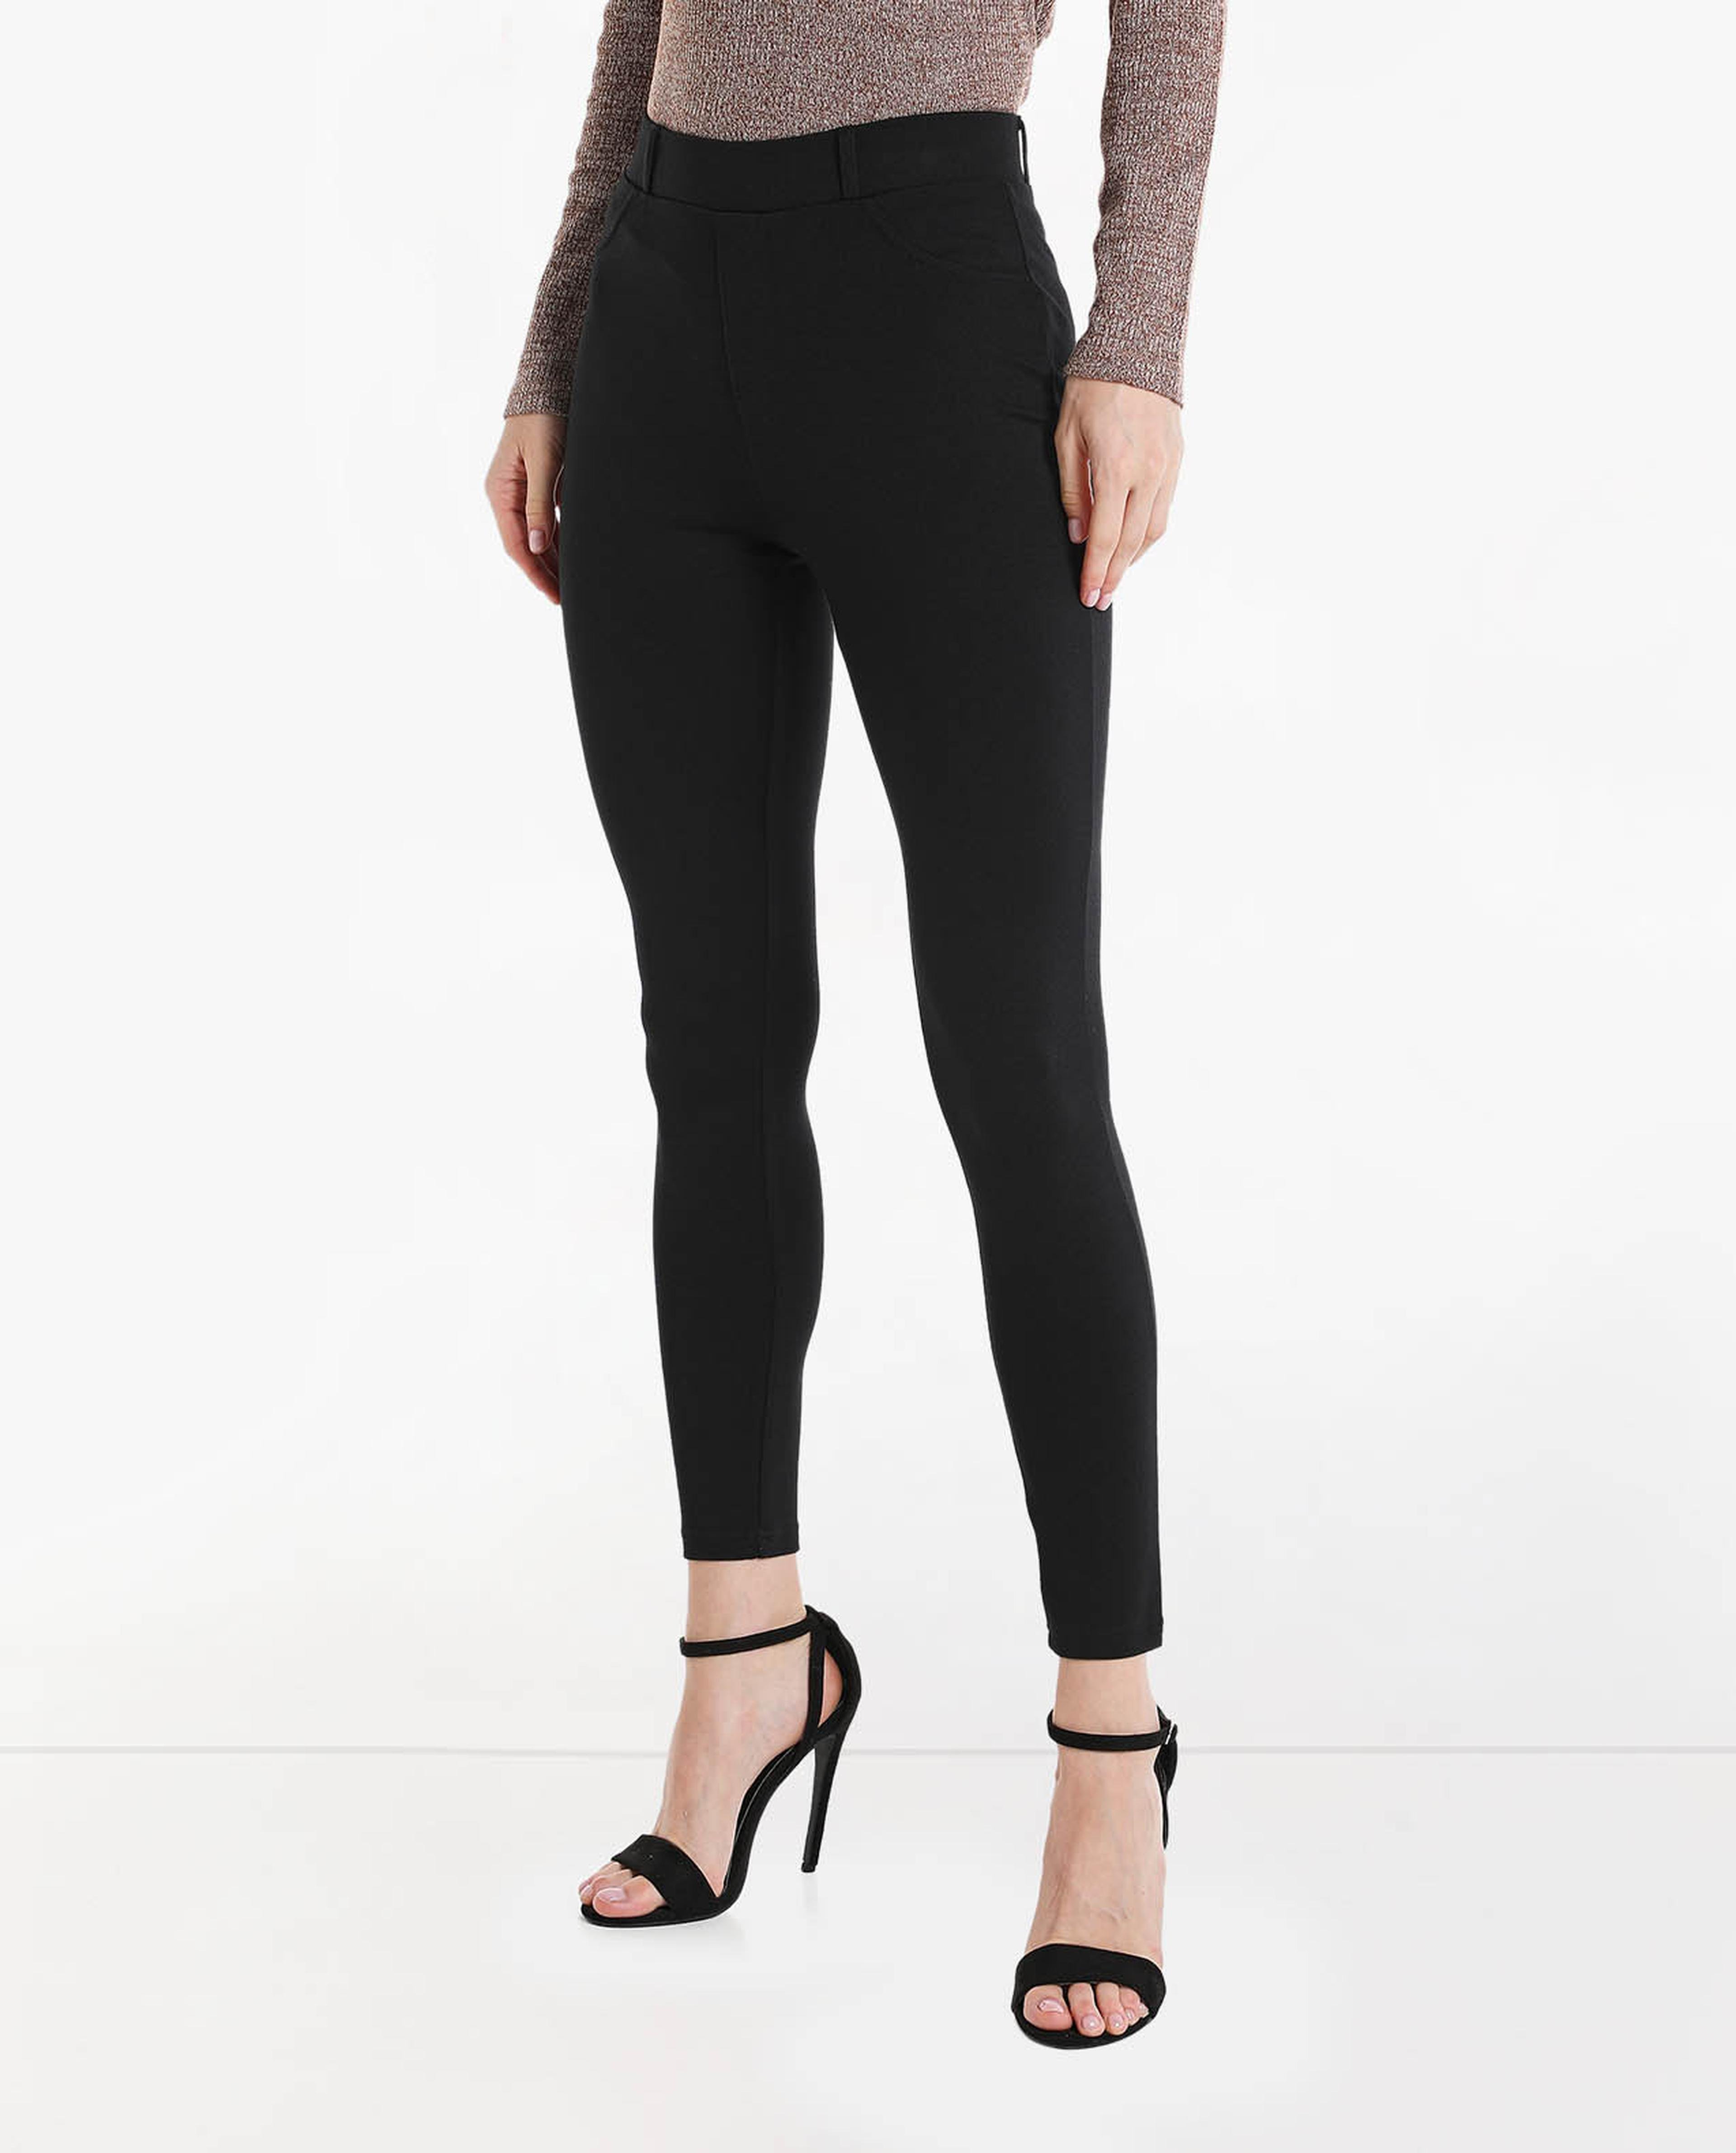 Shop Solid Knit Jeggings with Elasticated Waist Online